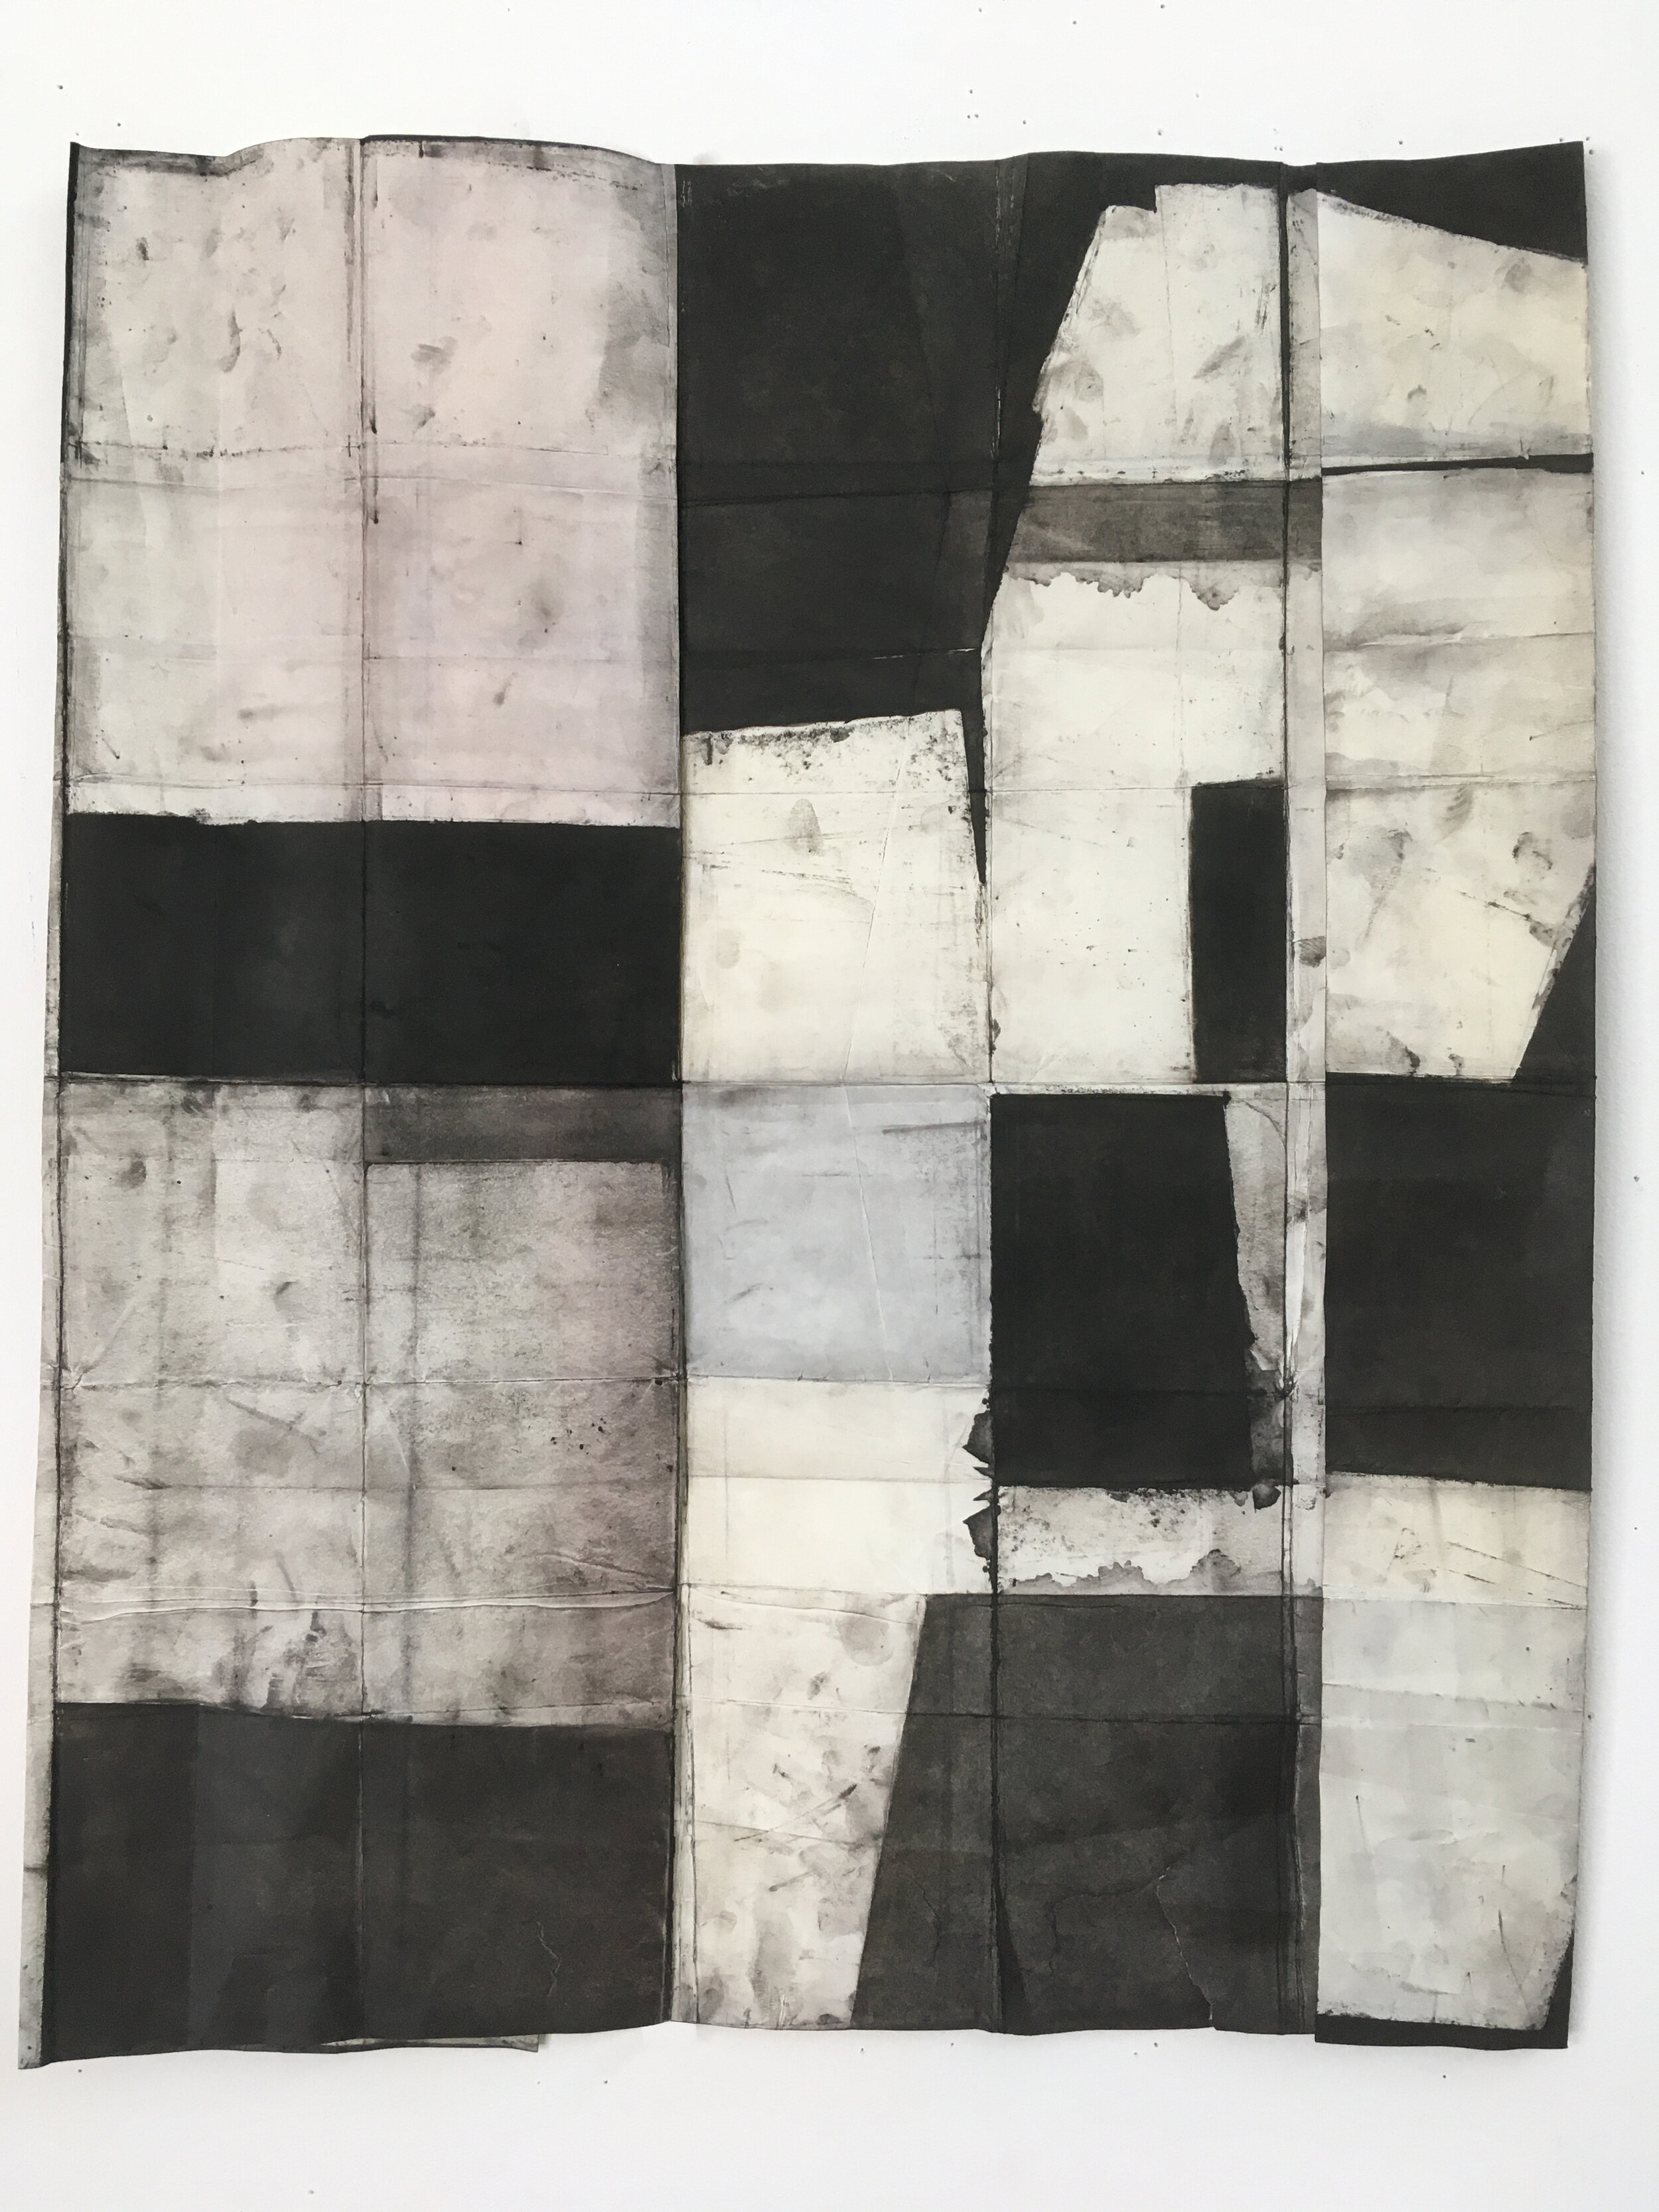  FD 21_01, 2021, charcoal and mineral oil on paper, 24 x 20 inches 